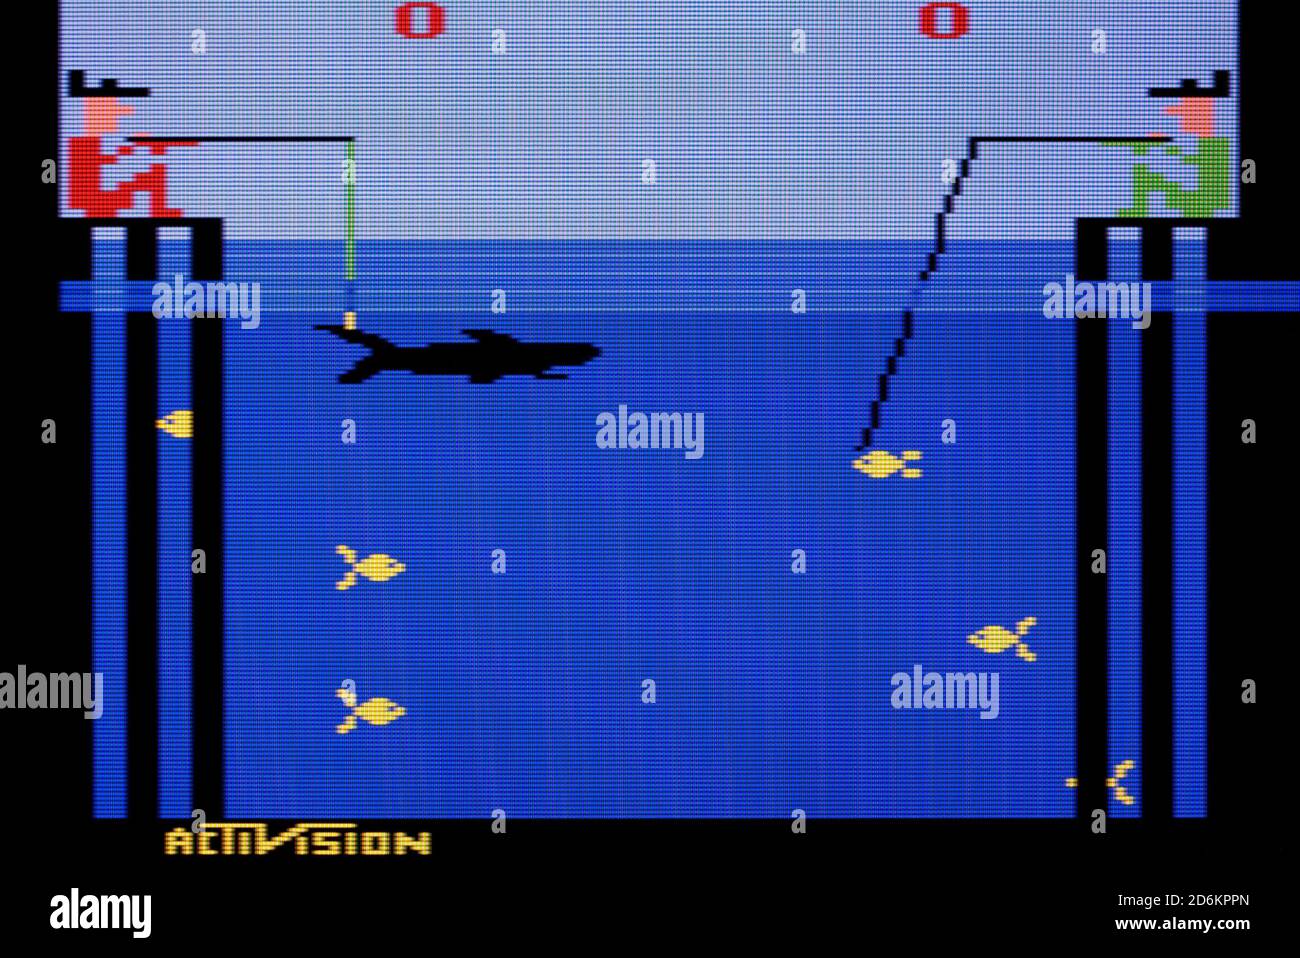 Fishing Derby - Activision - Atari 2600 VCS Videogame - Editorial use only Stock Photo